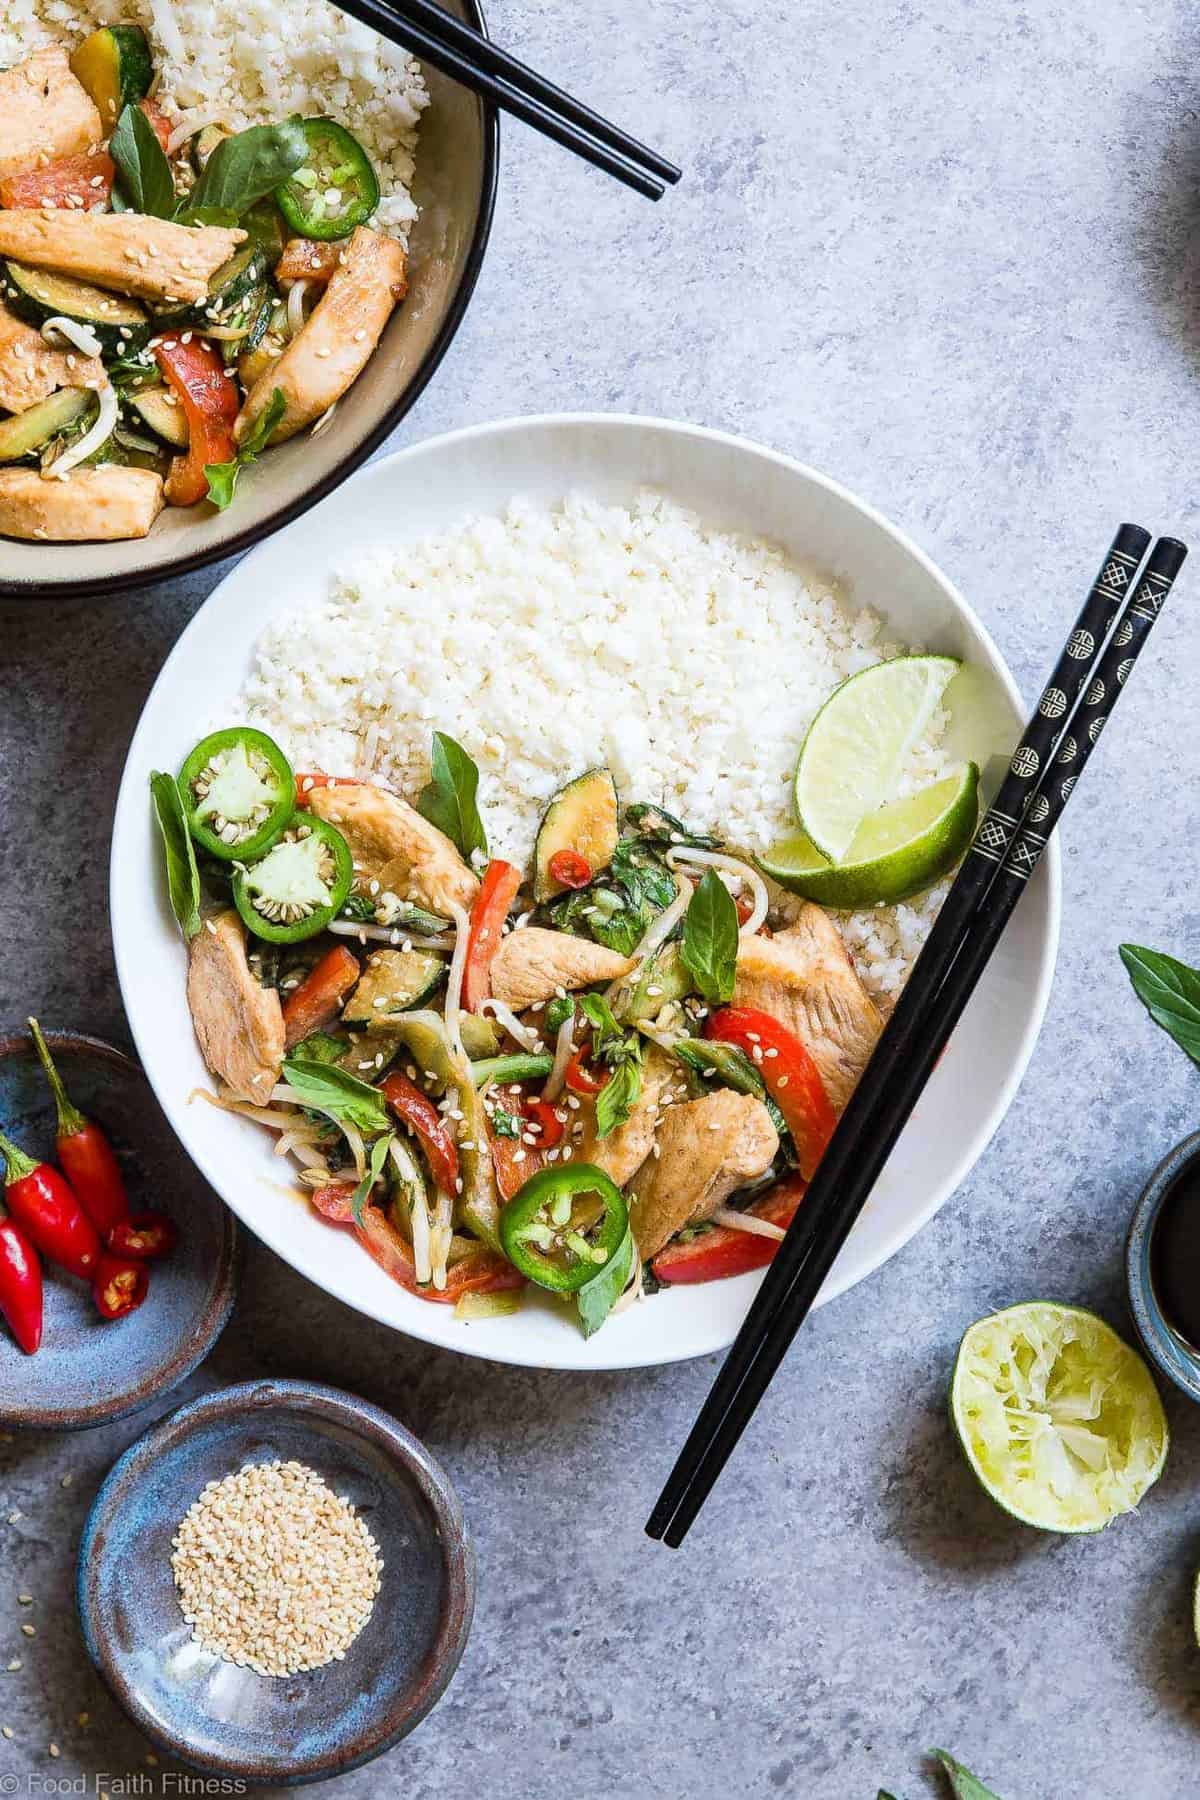 Spicy Thai Basil Chicken Stir Fry - A 20 minute, healthy, gluten free dinner that is paleo friendly, lower carb and only 300 calories! It will be your new go to weeknight meal! | #Foodfaithfitness | #Glutenfree #Paleo #Lowcarb #Healthy #DairyFree